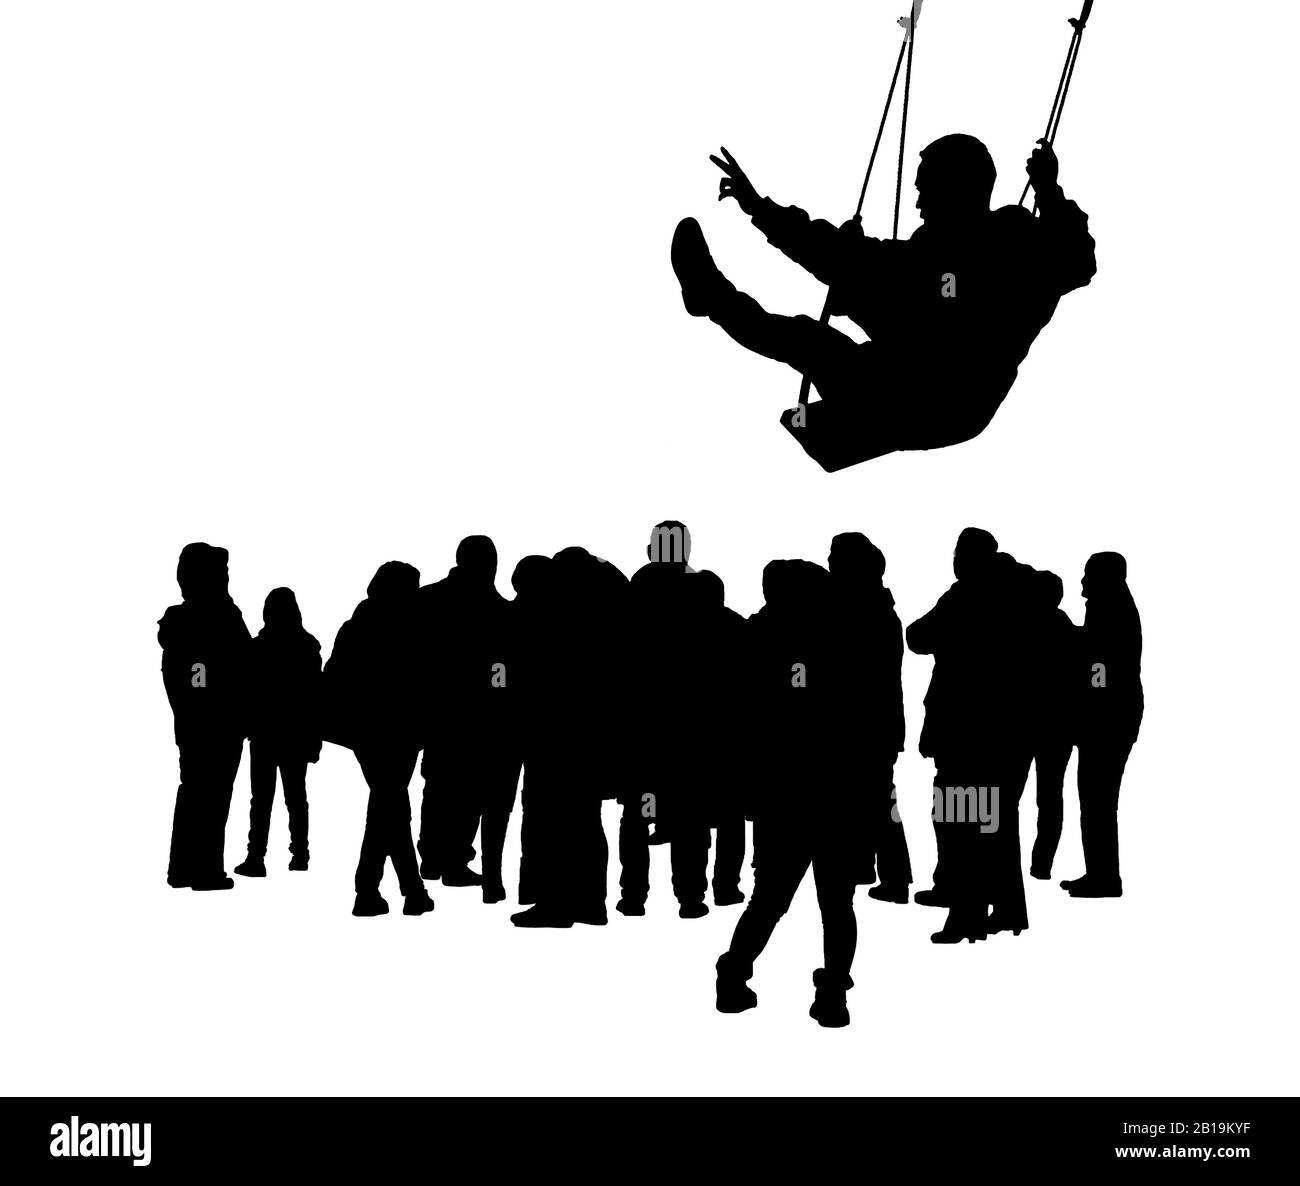 Stand out from the crowd graphic silhouette illustration concept in black and white colors Stock Photo